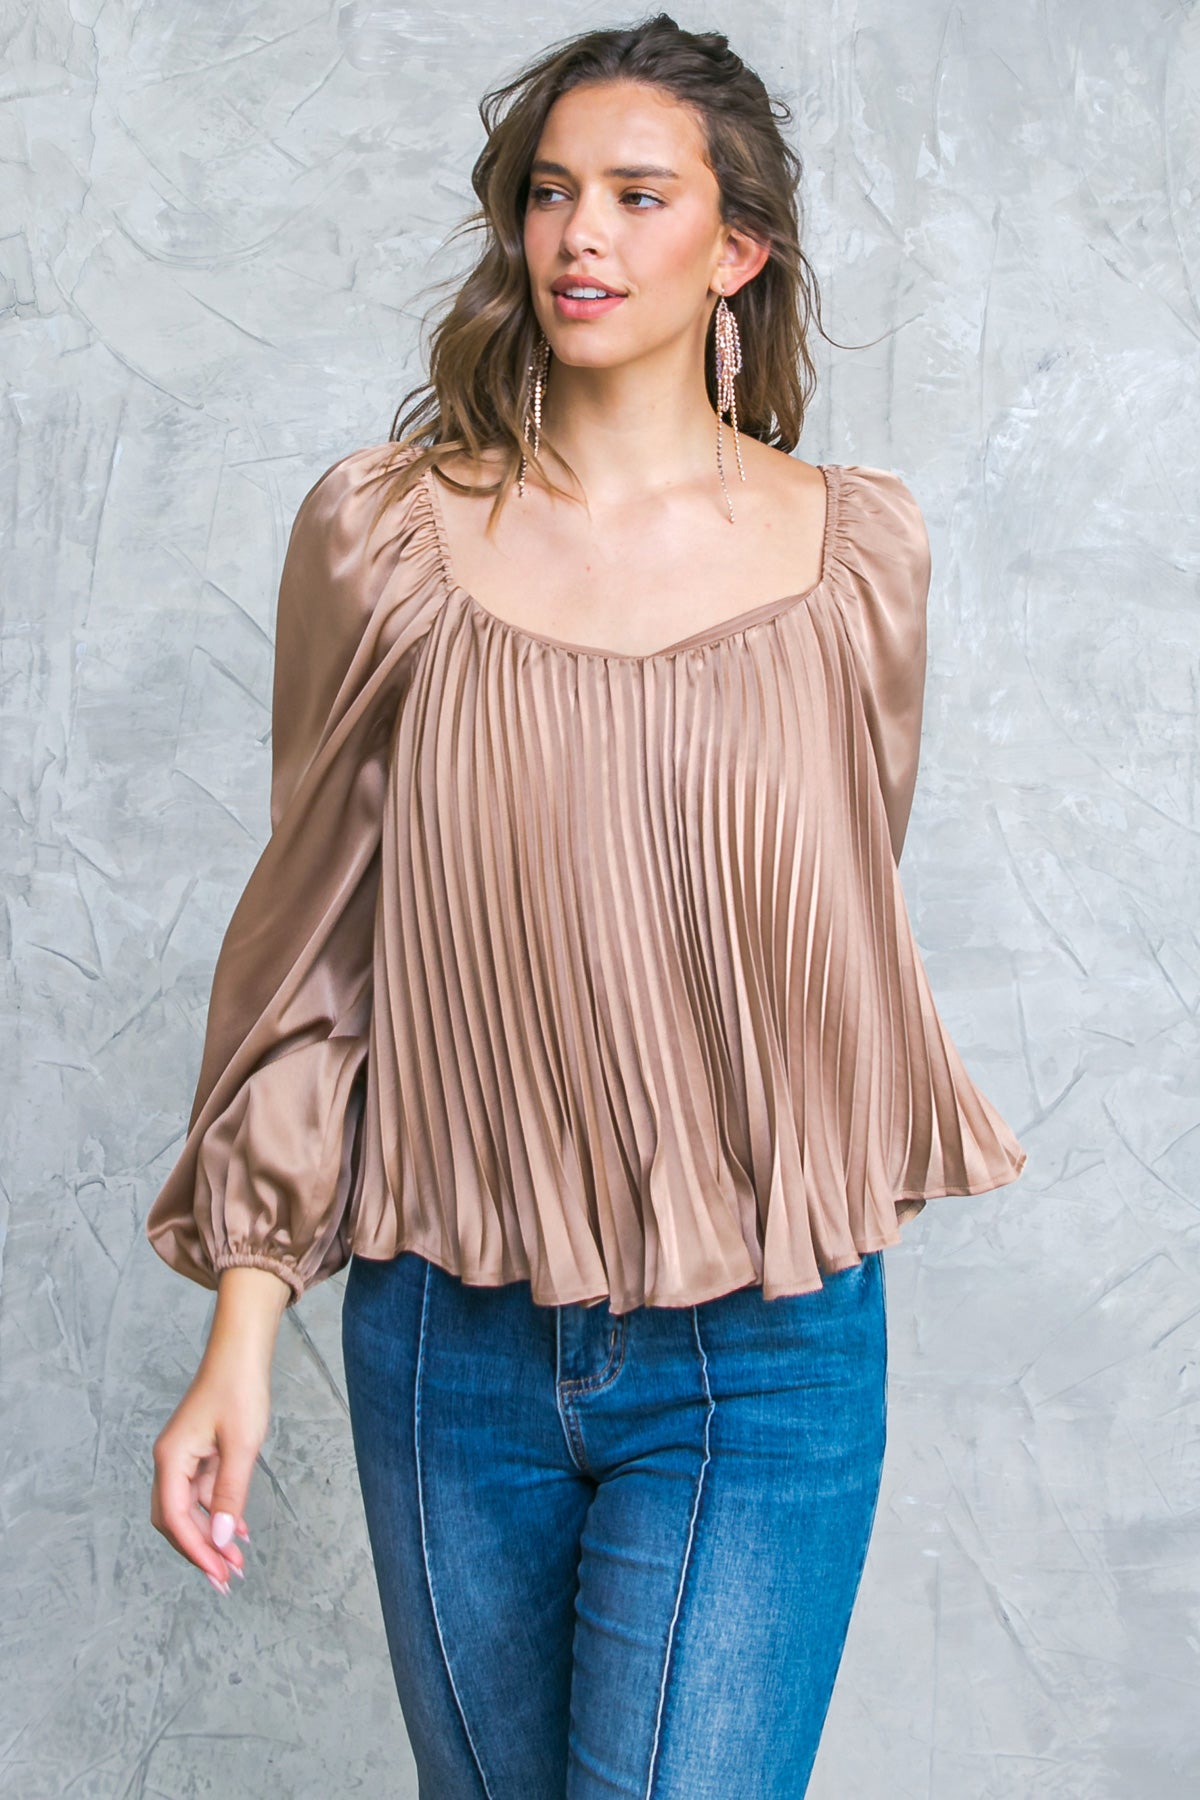 Gold party top, solid woven material, dreamy sweetheart neckline, and playful pleated bodice